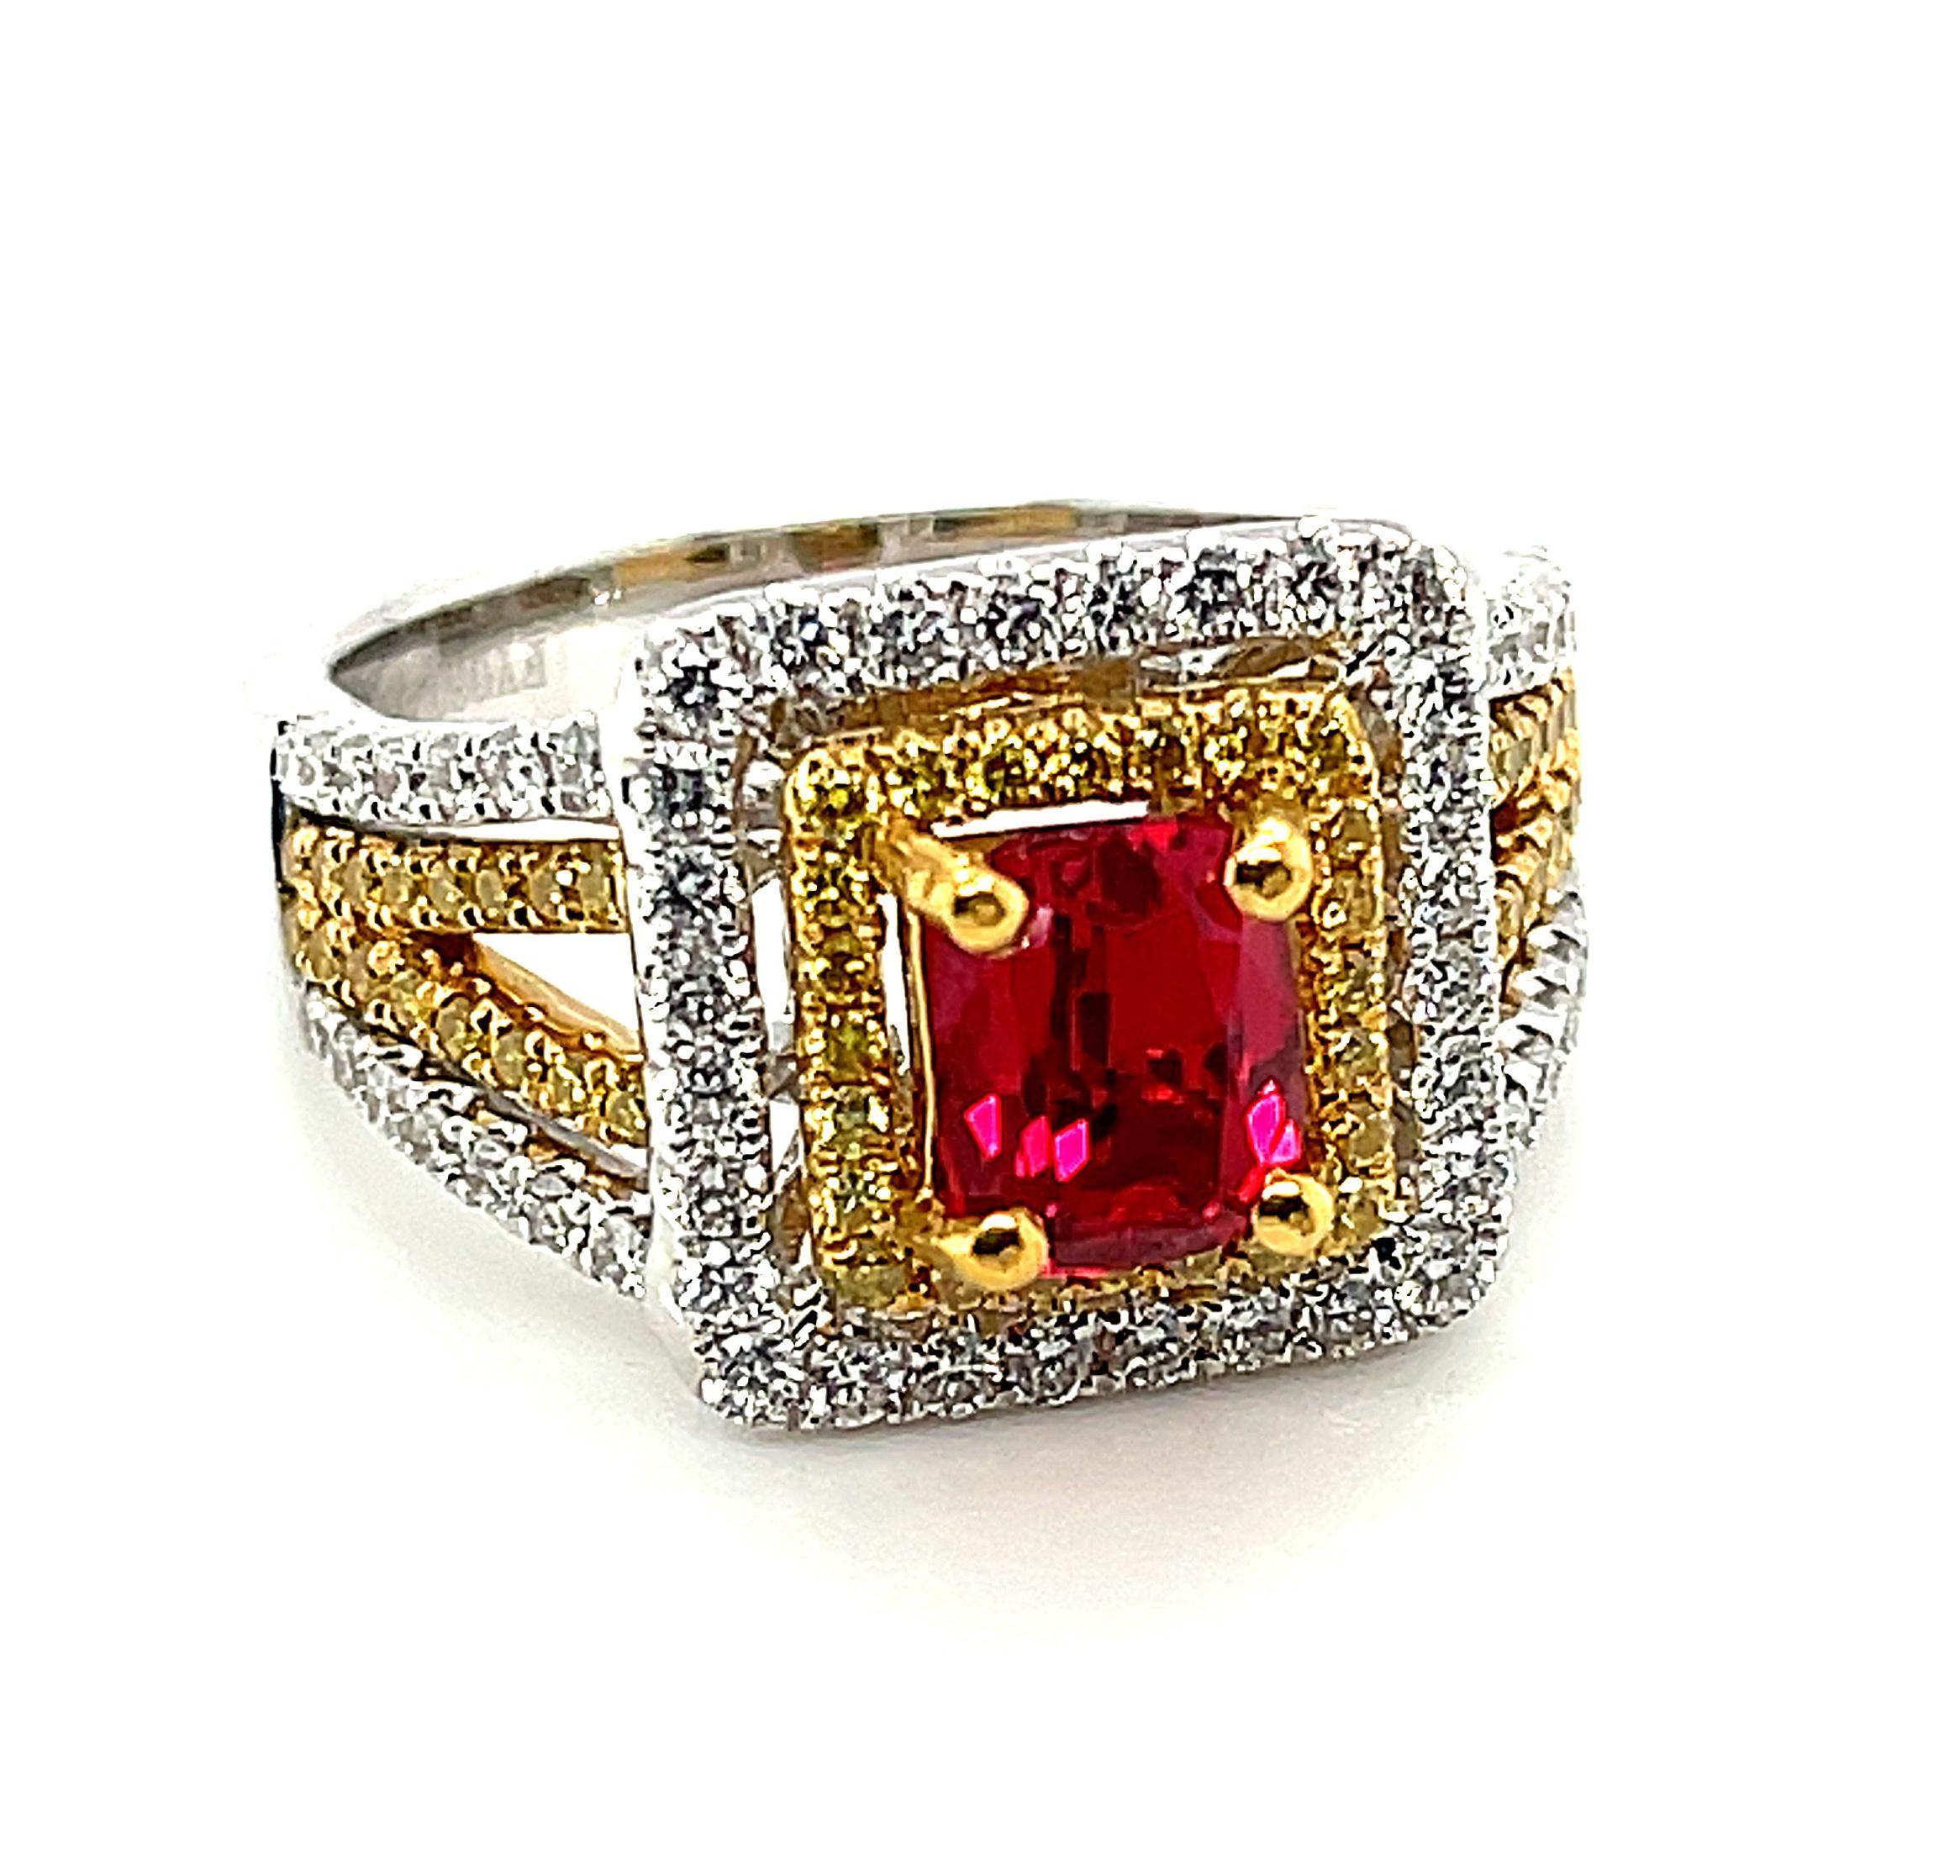 Artisan 1.23 Carat Burmese Red Spinel and Diamond Cocktail Ring in Yellow and White Gold For Sale